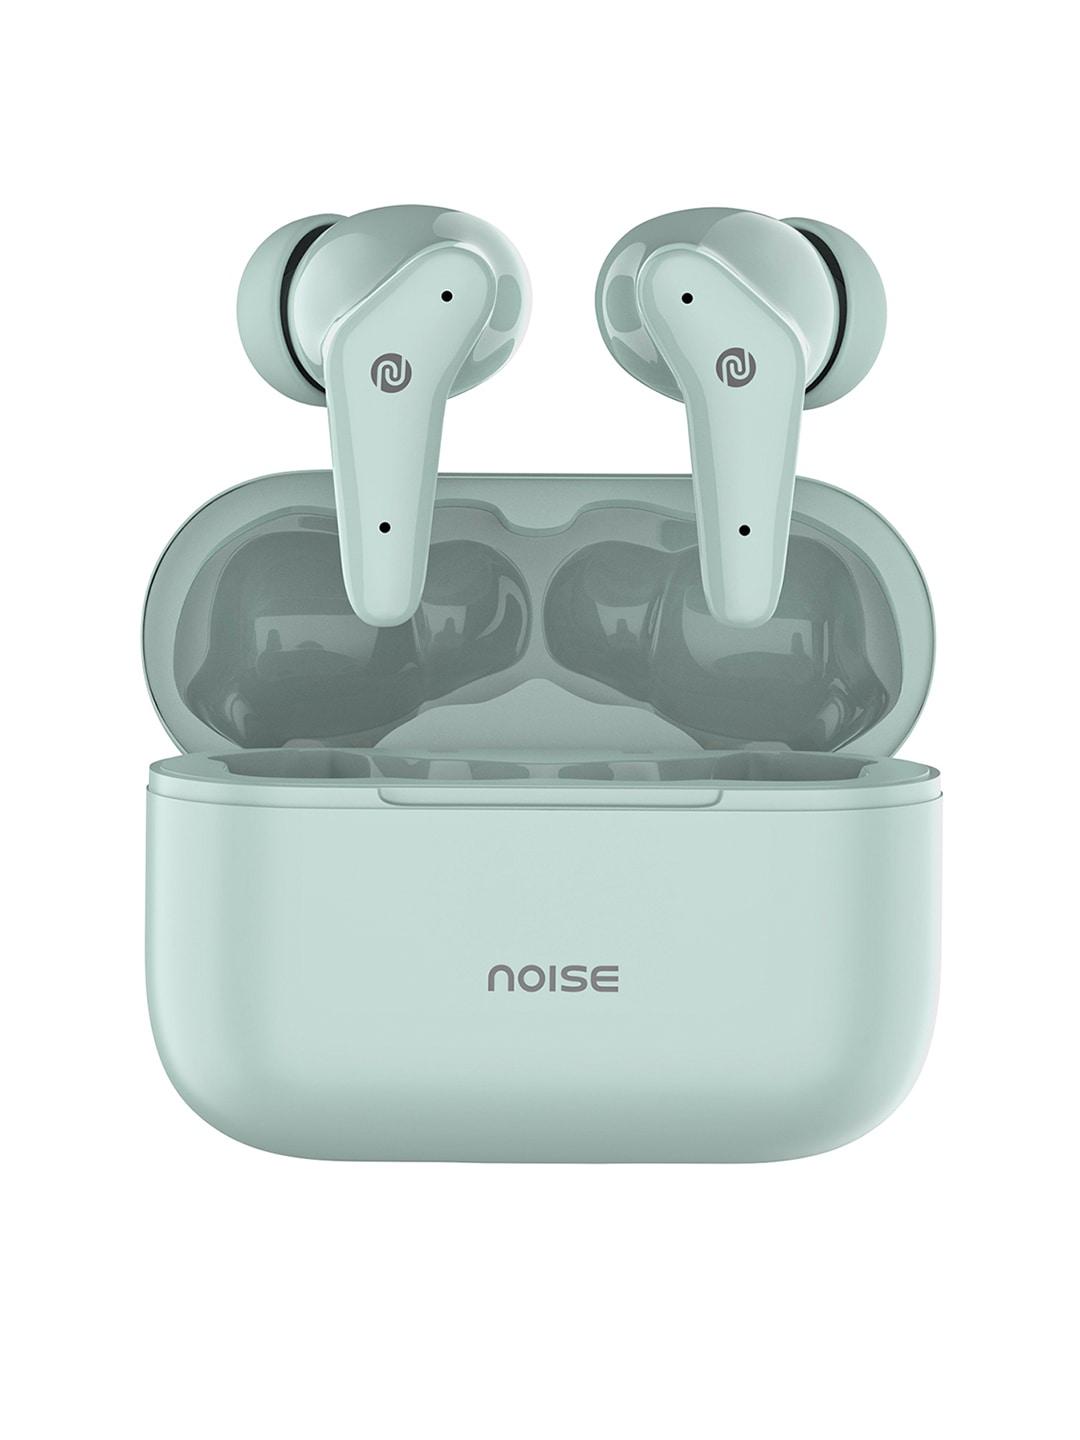 noise-buds-vs102-truly-wireless-earbuds-with-50hrs-playtime-and-11mm-driver